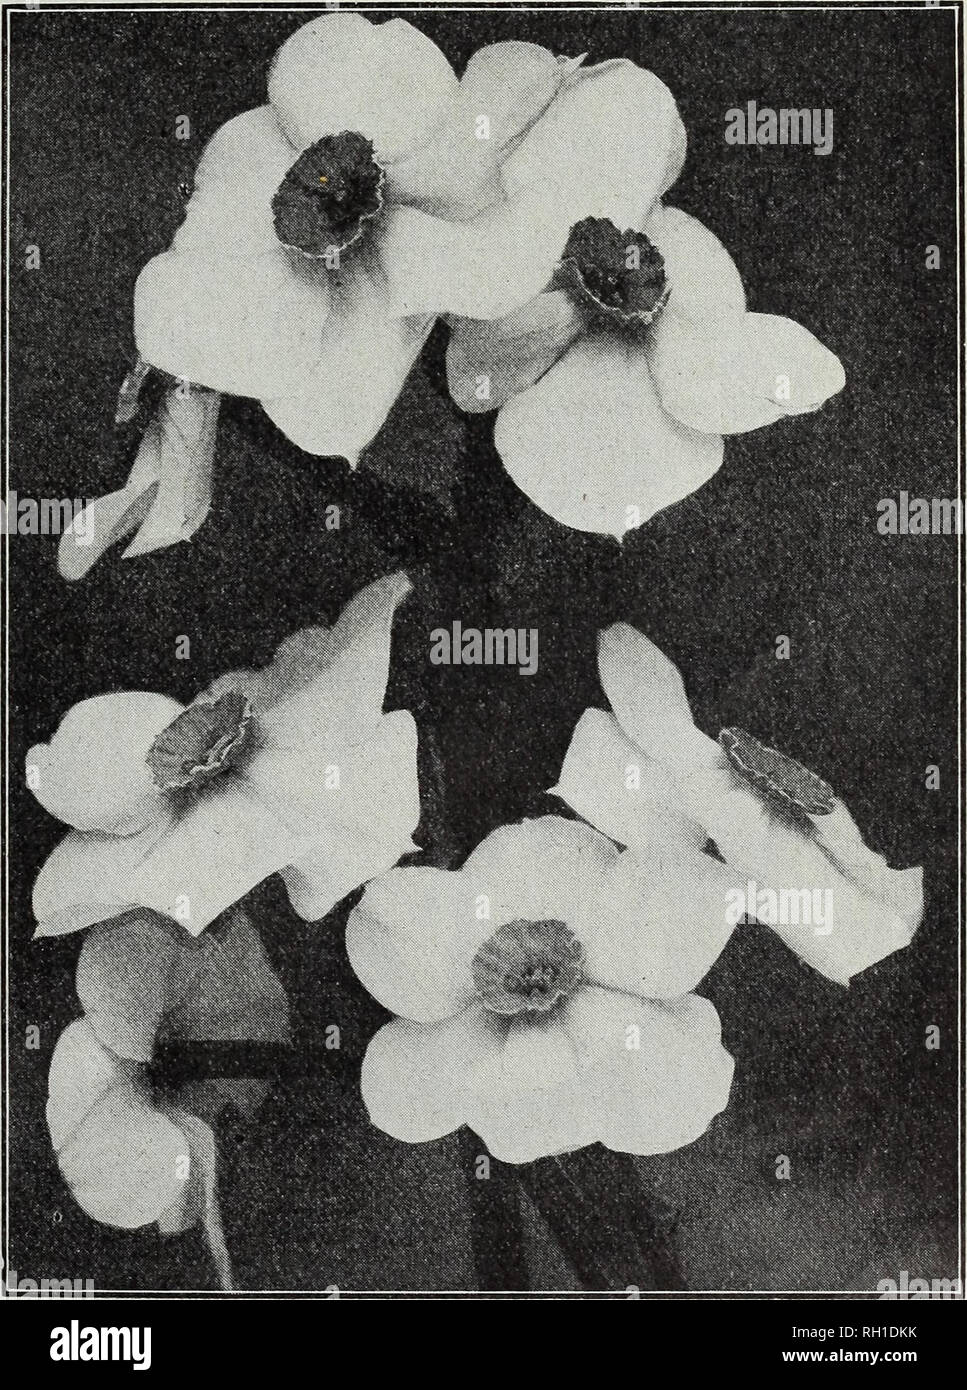 . Bulbs &amp; seeds : autumn 1914. Seeds Catalogs; Bulbs (Plants) Catalogs; Vegetables Seeds Catalogs. M. FERRY Sc CO., DETROIT, MICH. 13 DOUBLE NARCISSUS (daffodil) These hardy double daffodils are much in demand for outdoor bedding and borders and with the ex- ception of Albus Plenus Odoratus they succeed well for indoor forcing. All are fine for cutting. EACH DOZ Incomparable {Butter a7id £g-o-s) L#rge very double flowers, light yellow and orange, fra- grant, splendid for winter cut flowers or out of doors. {See cut, page 12) ^1.50 per 100. ... 3 Orange Phoenix {Eggs and Bacon) Creamy white Stock Photo